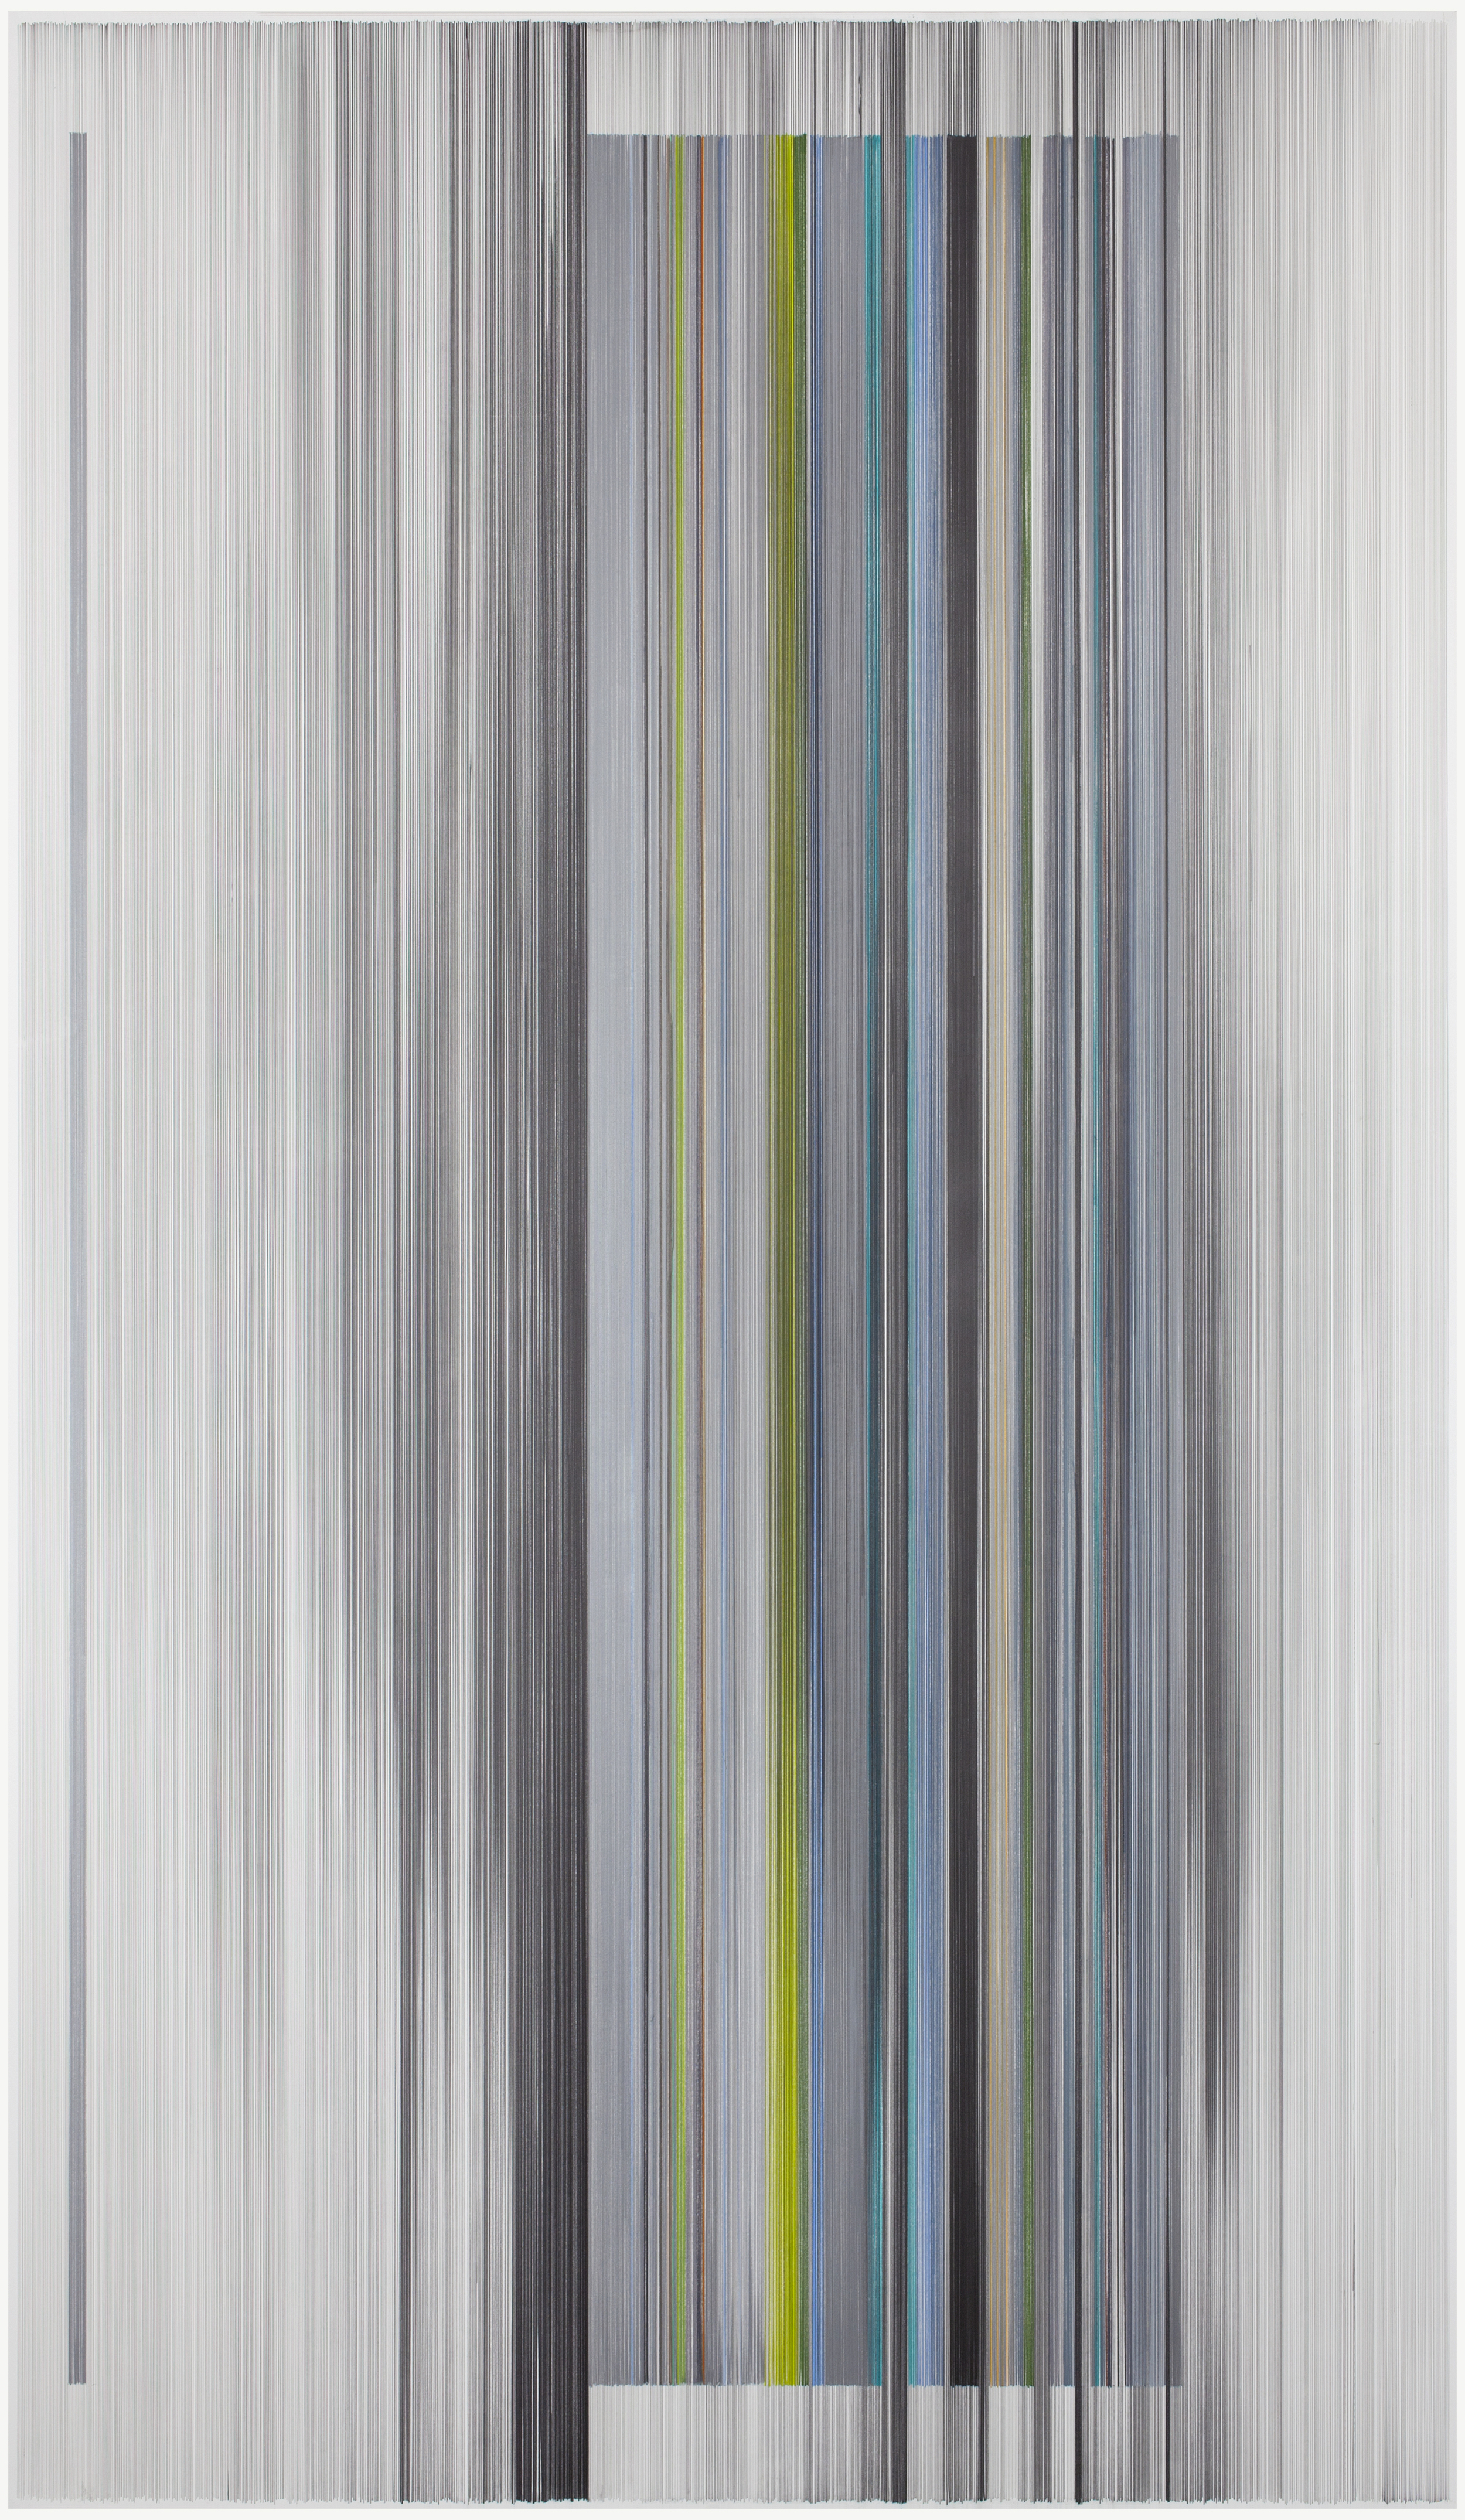    unfold 21   2016 graphite and colored pencil on mat board 102 x 59 inches 